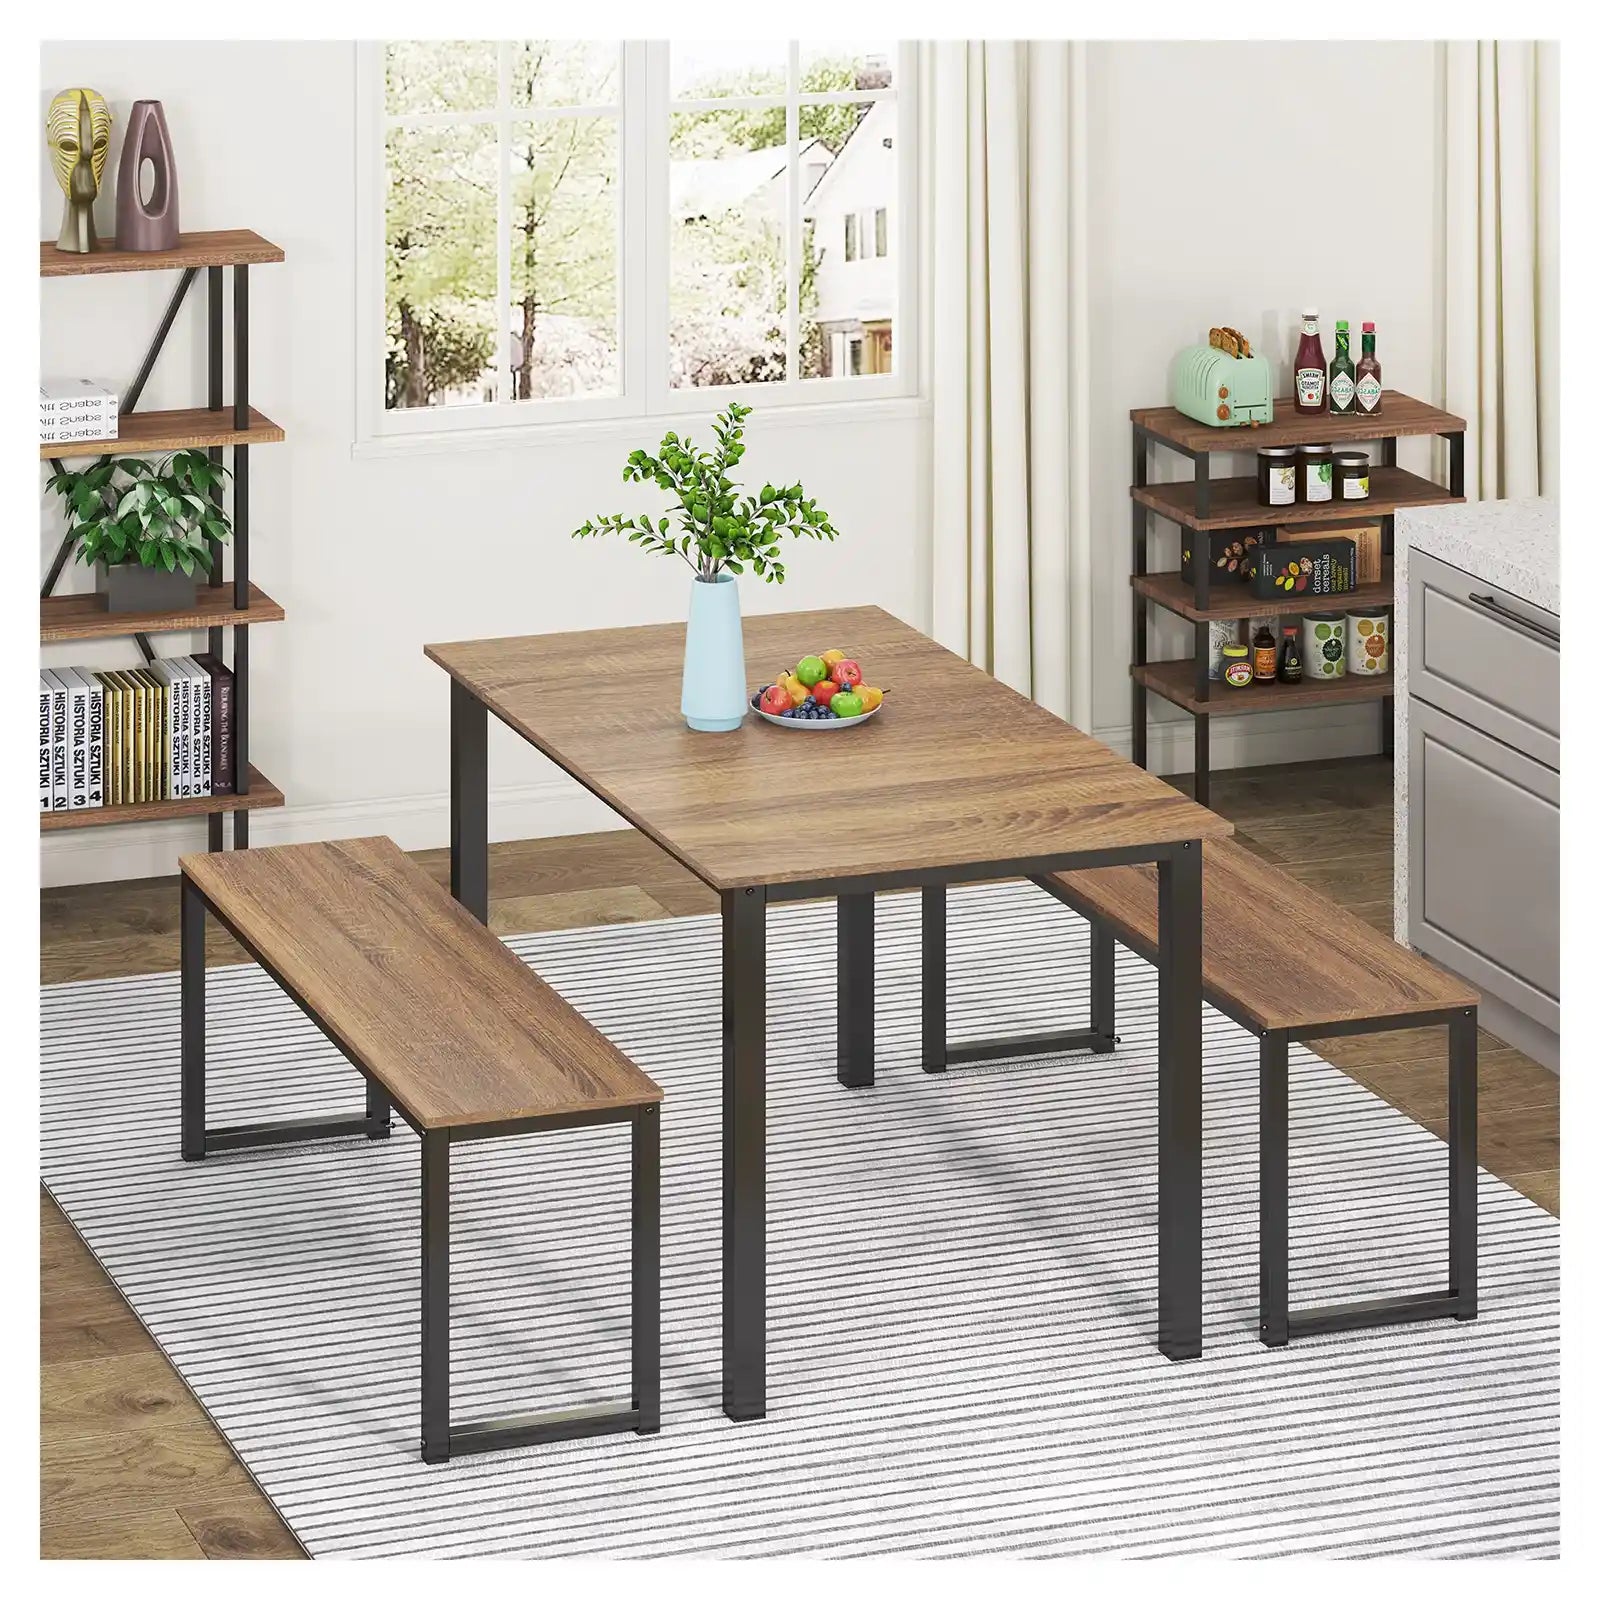 3 Piece Dining Table Set with Two Benches for Dining Room, Kitchen , Living Room